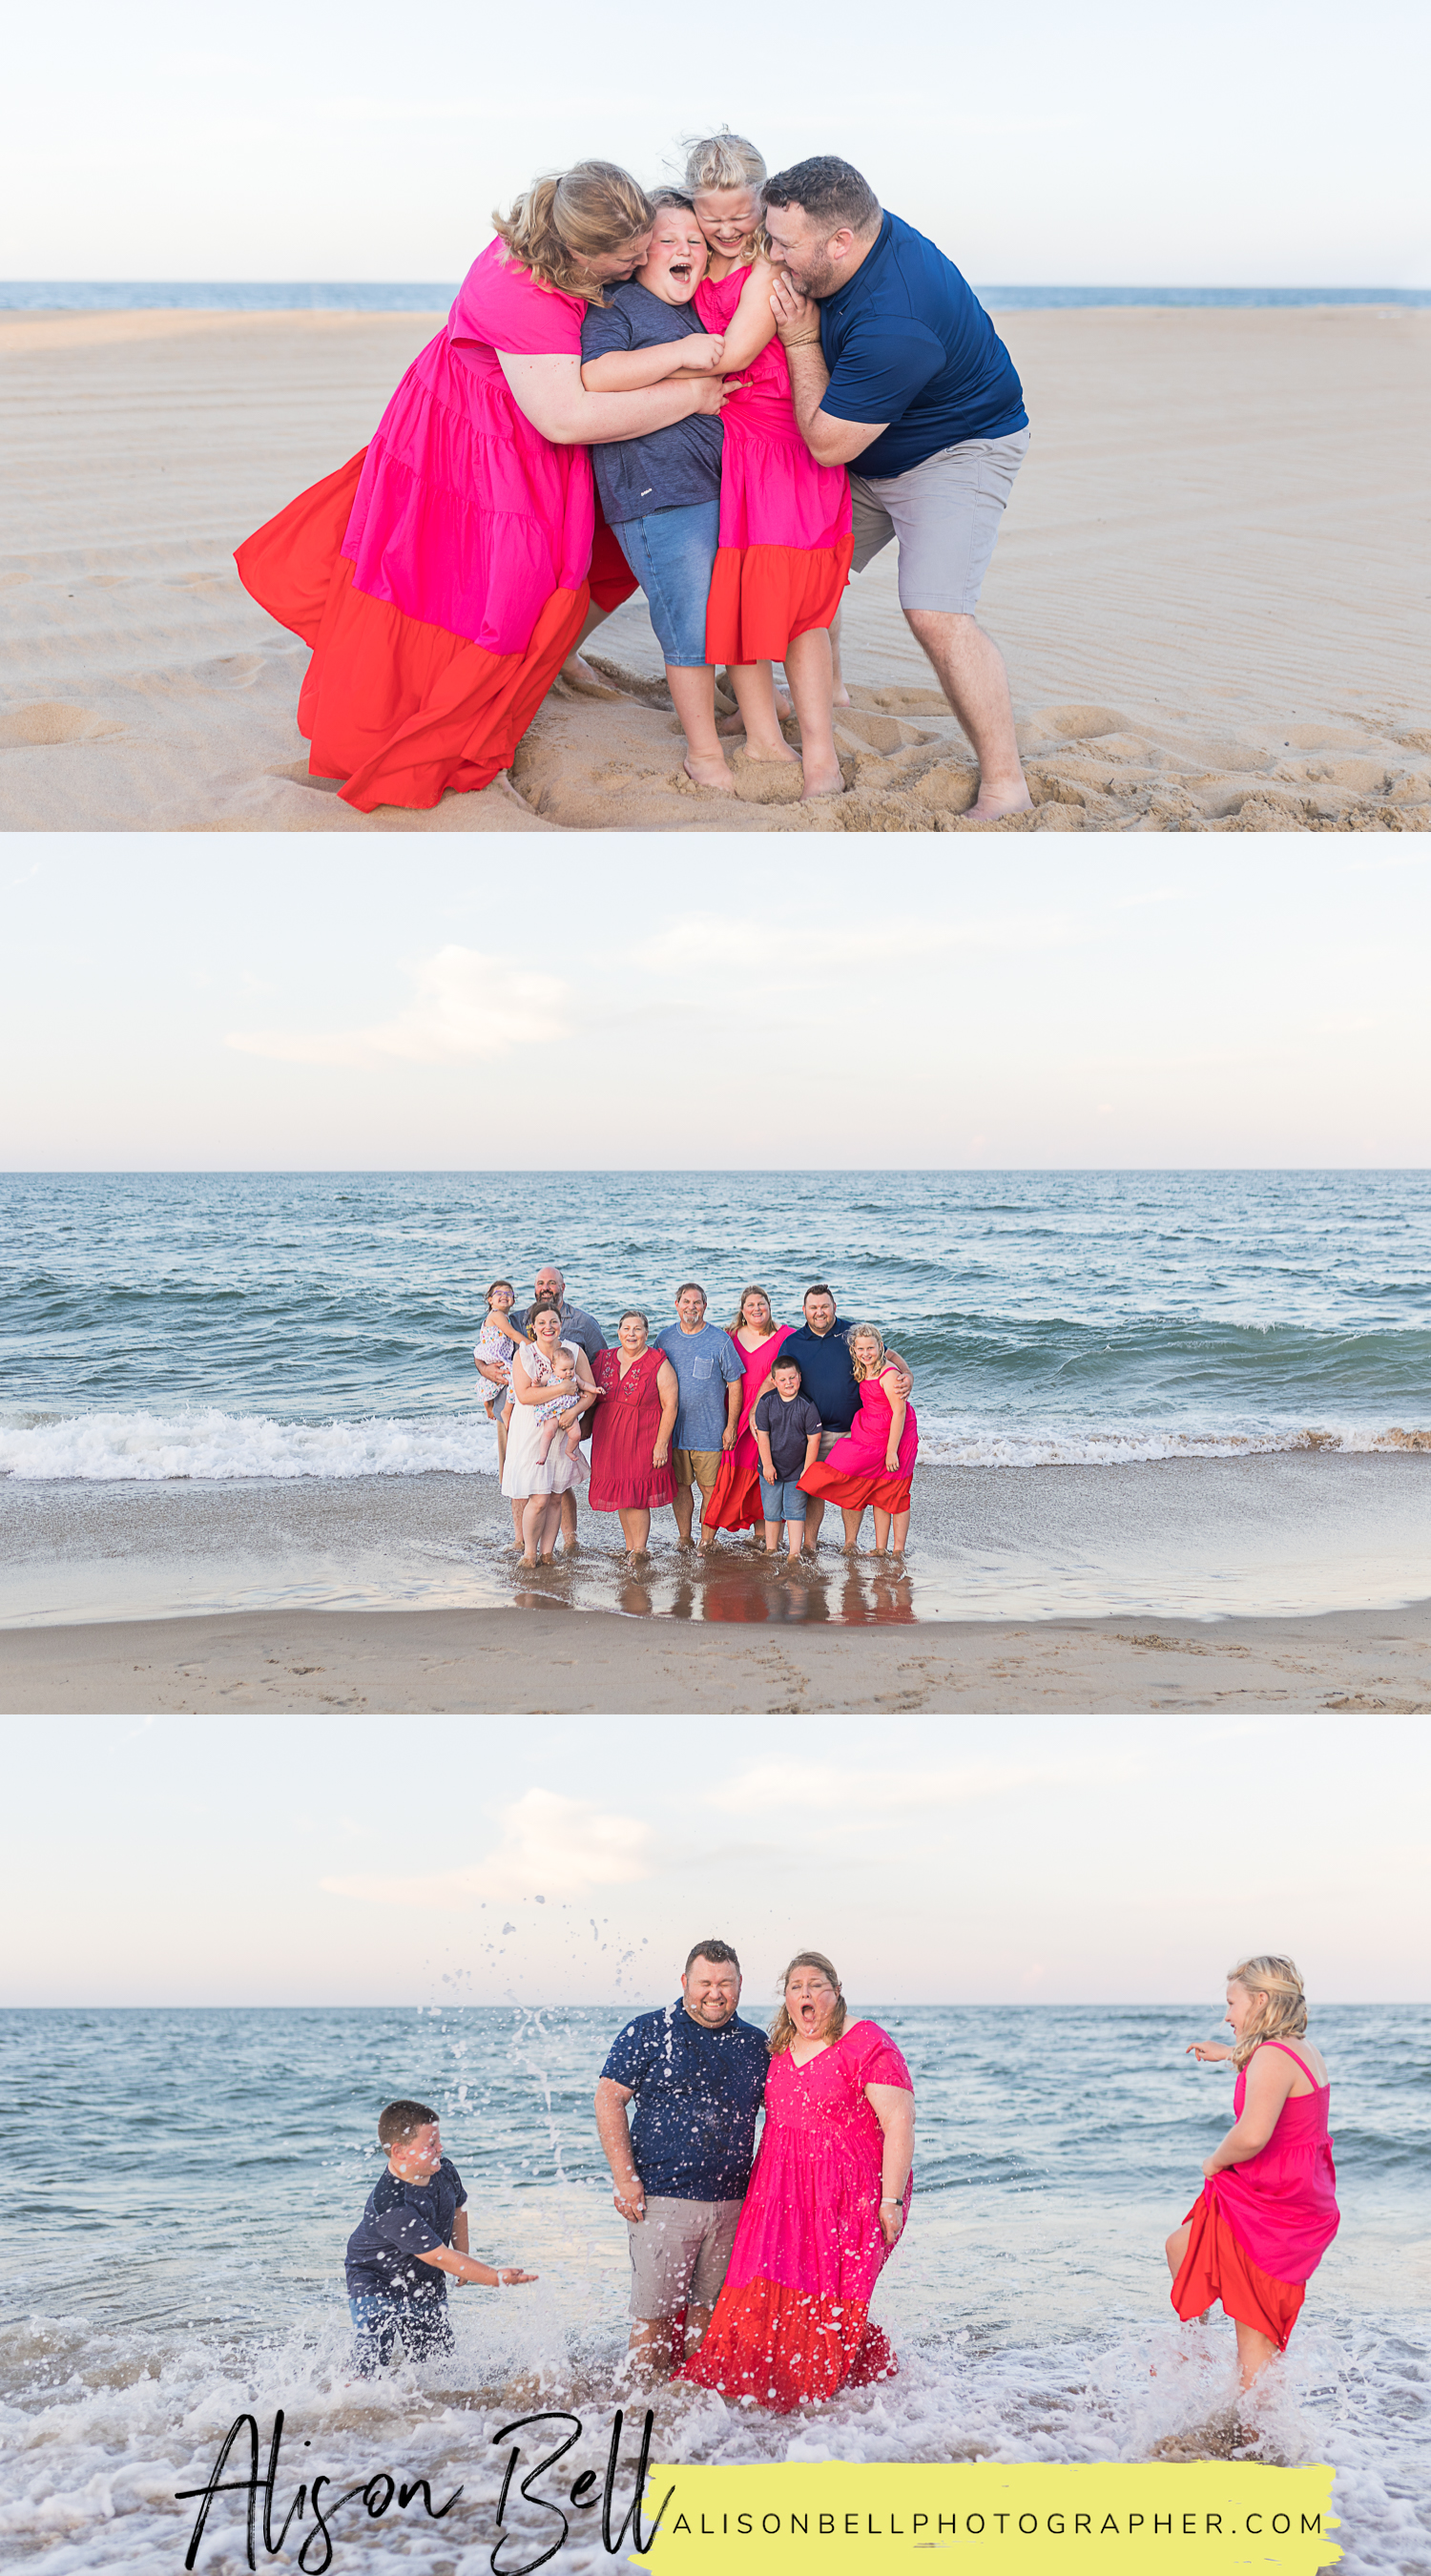 Extended family photo session on the beach by Alison Bell, Photographer